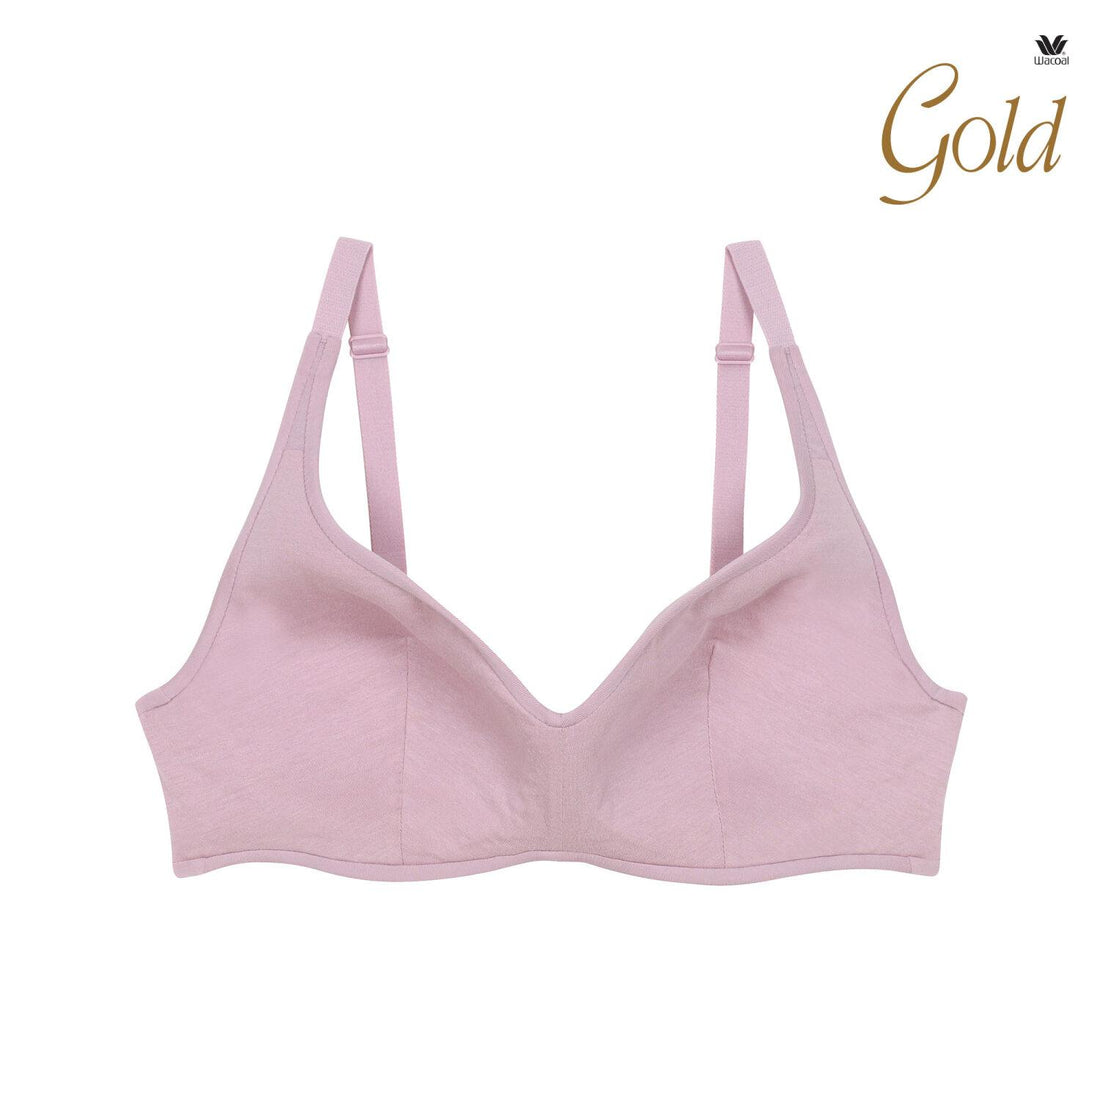 Wacoal Gold, healthy bra without wire, soft and comfortable touch, model  WO1519, light purple (LV)